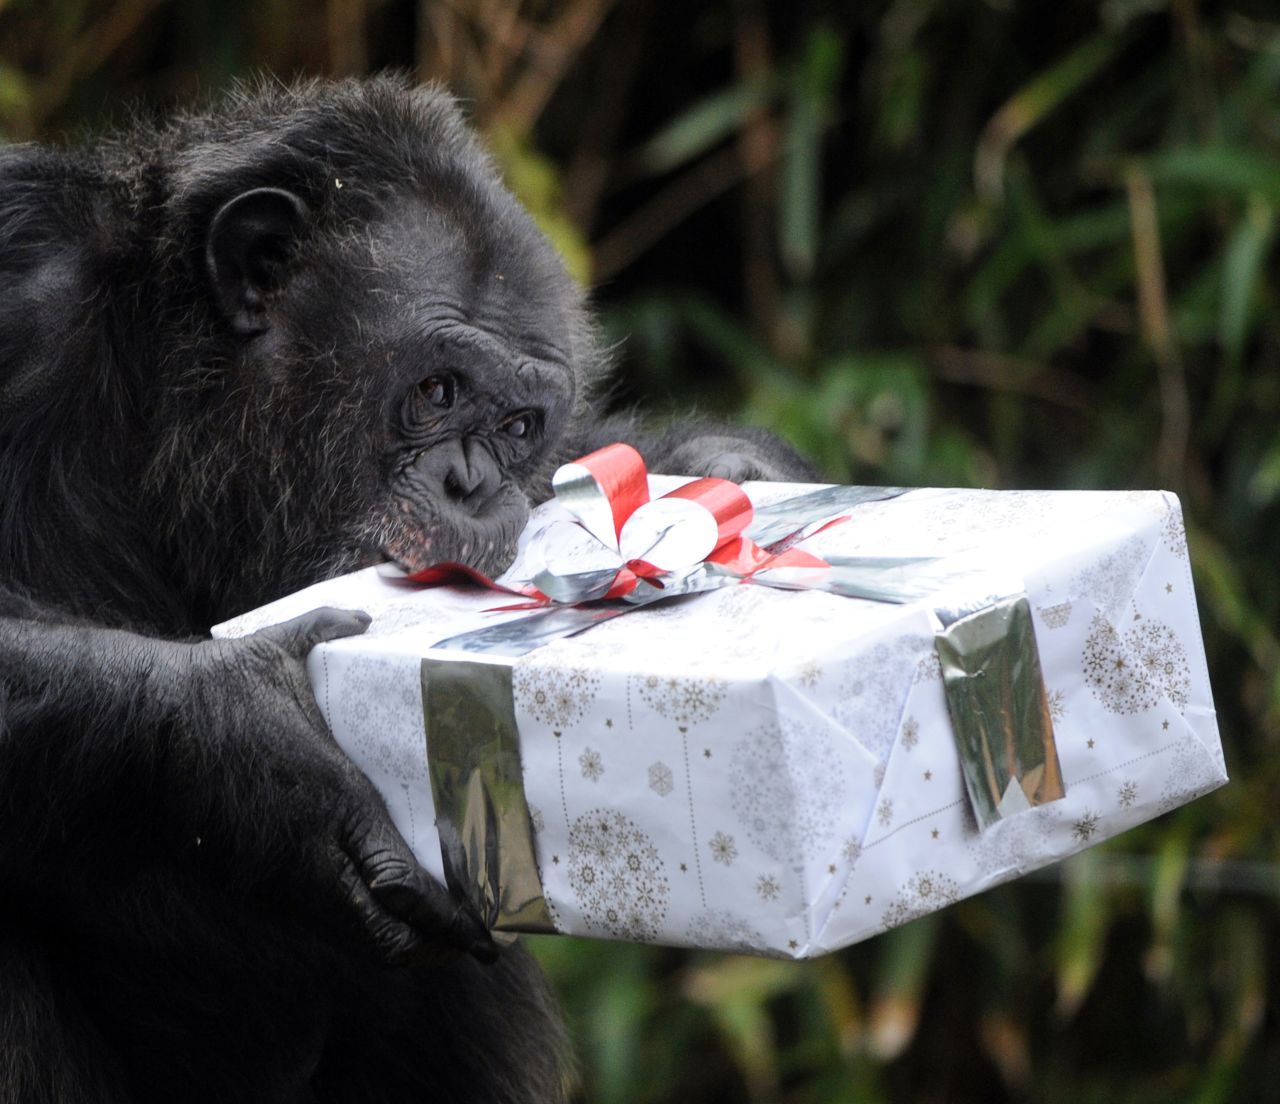 A chimpanzee opens a package filled with treats at a zoo in La Fleche, France, on December 23. 